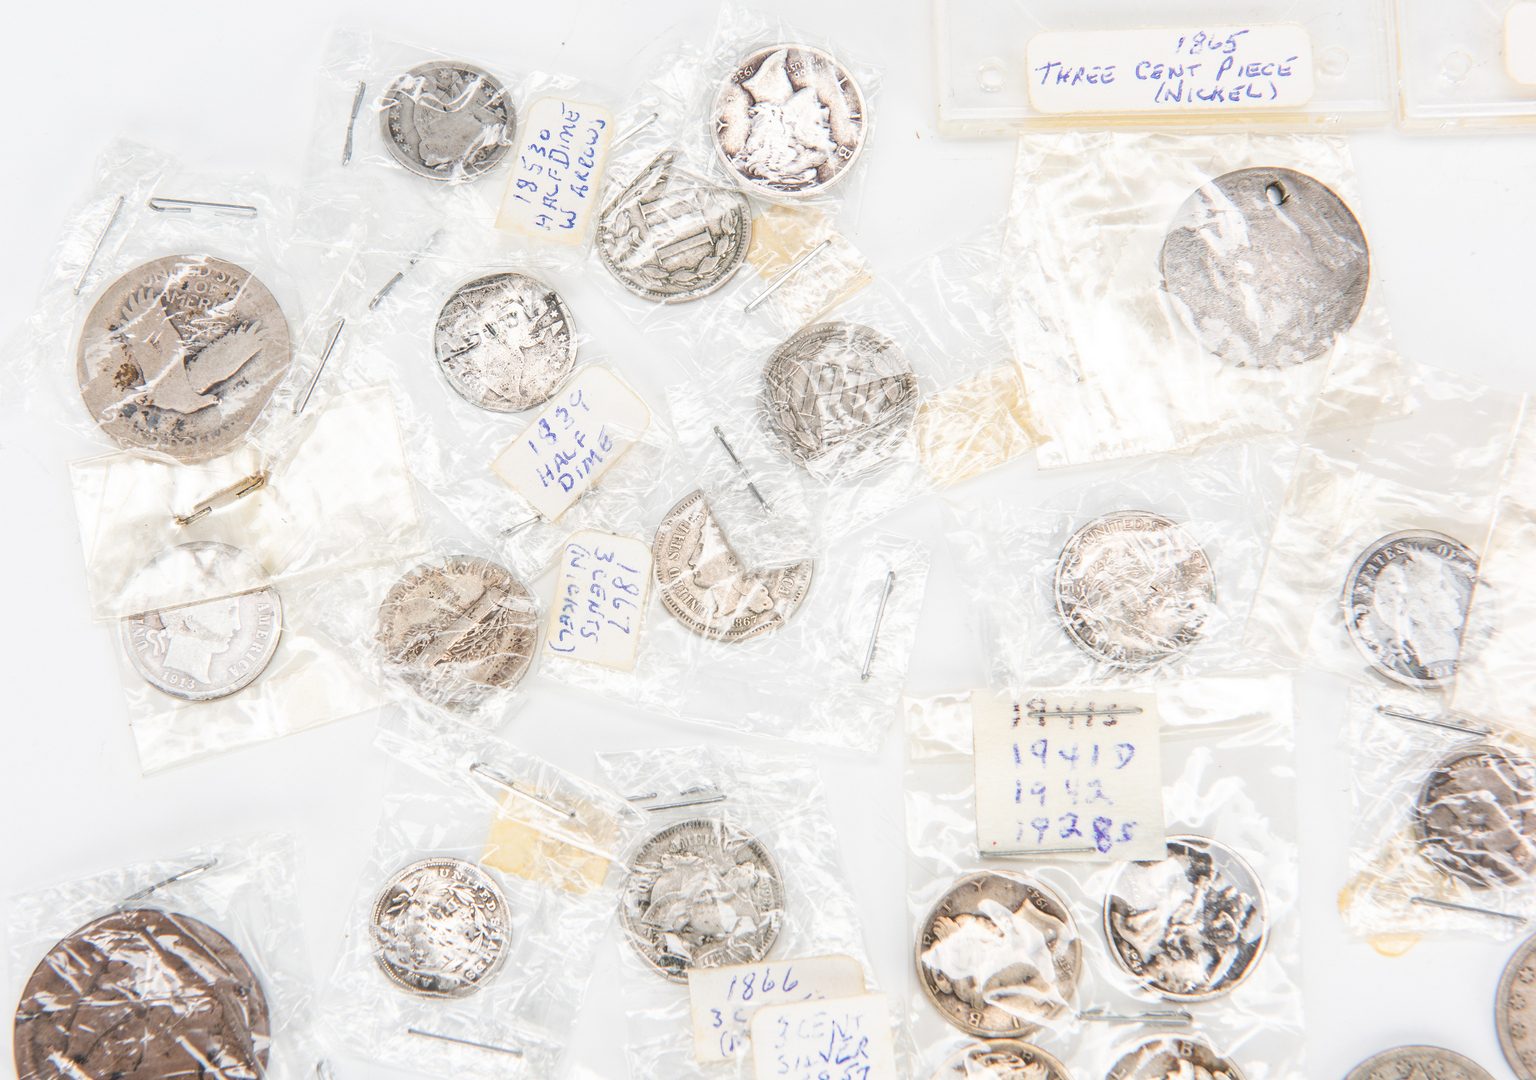 Lot 419: 811 US/International Coins and More